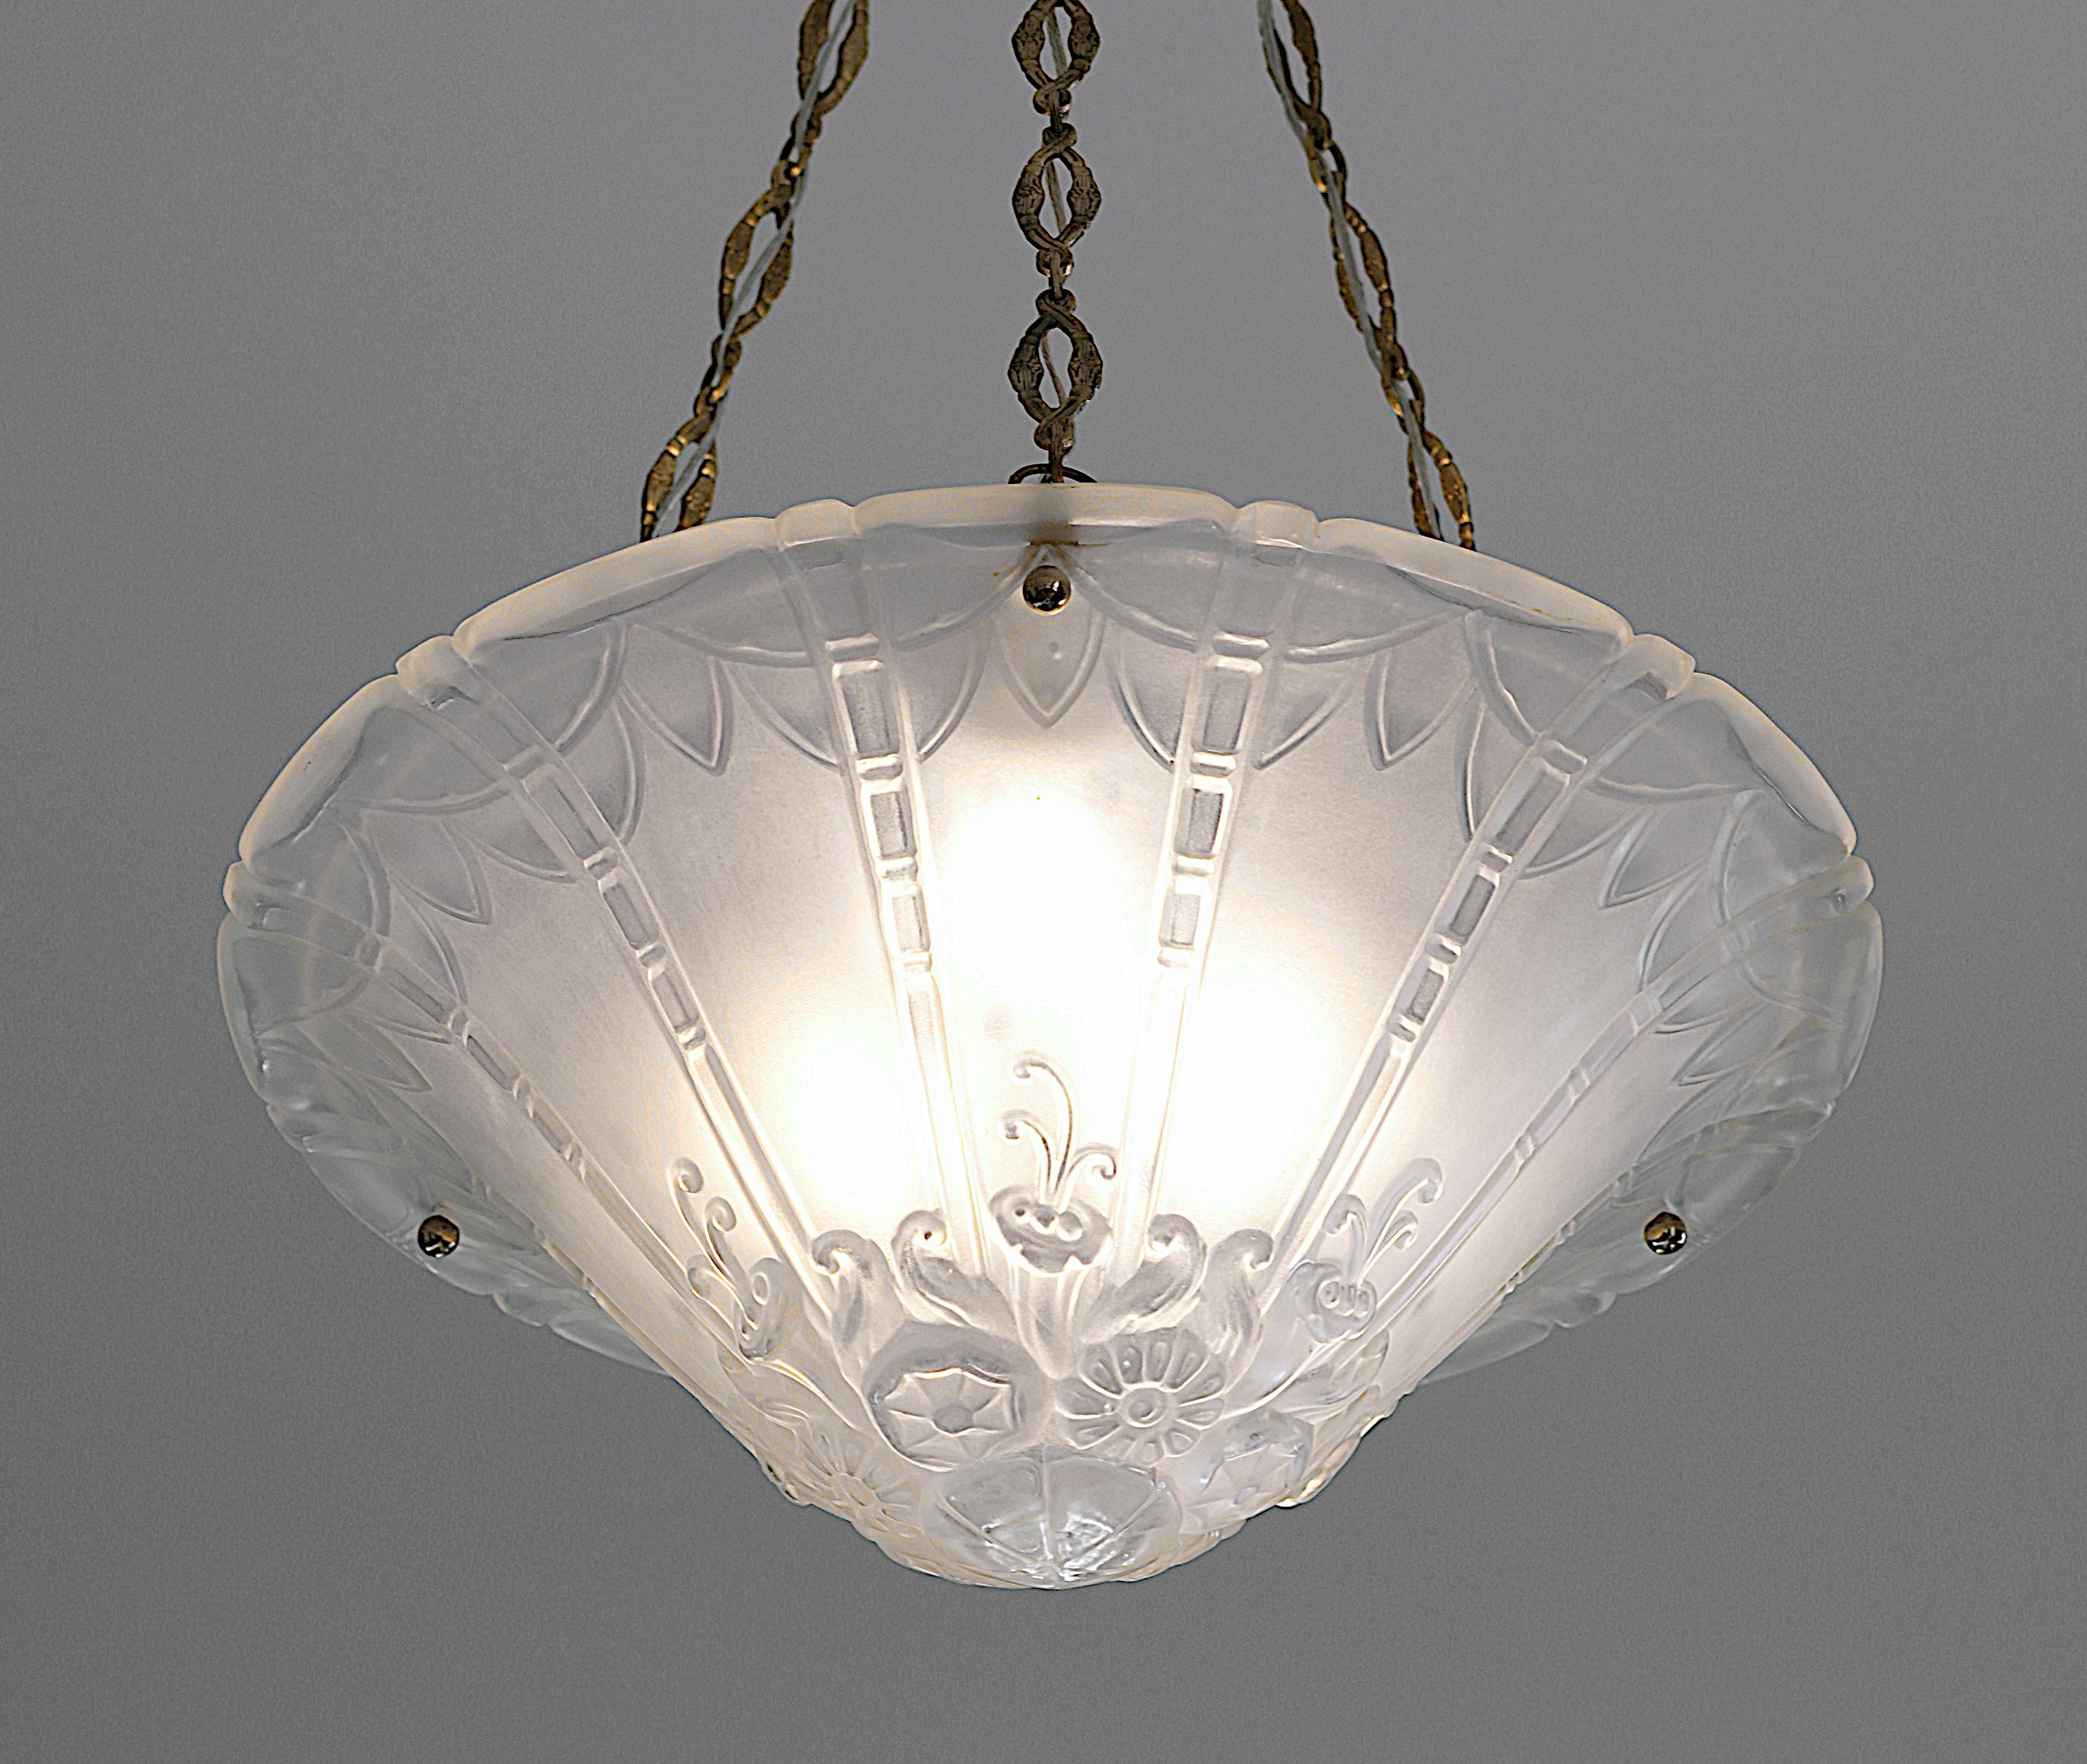 Molded Daum Pierre D'Avesn Large French Art Deco Pendant Chandelier, Early 1930s For Sale